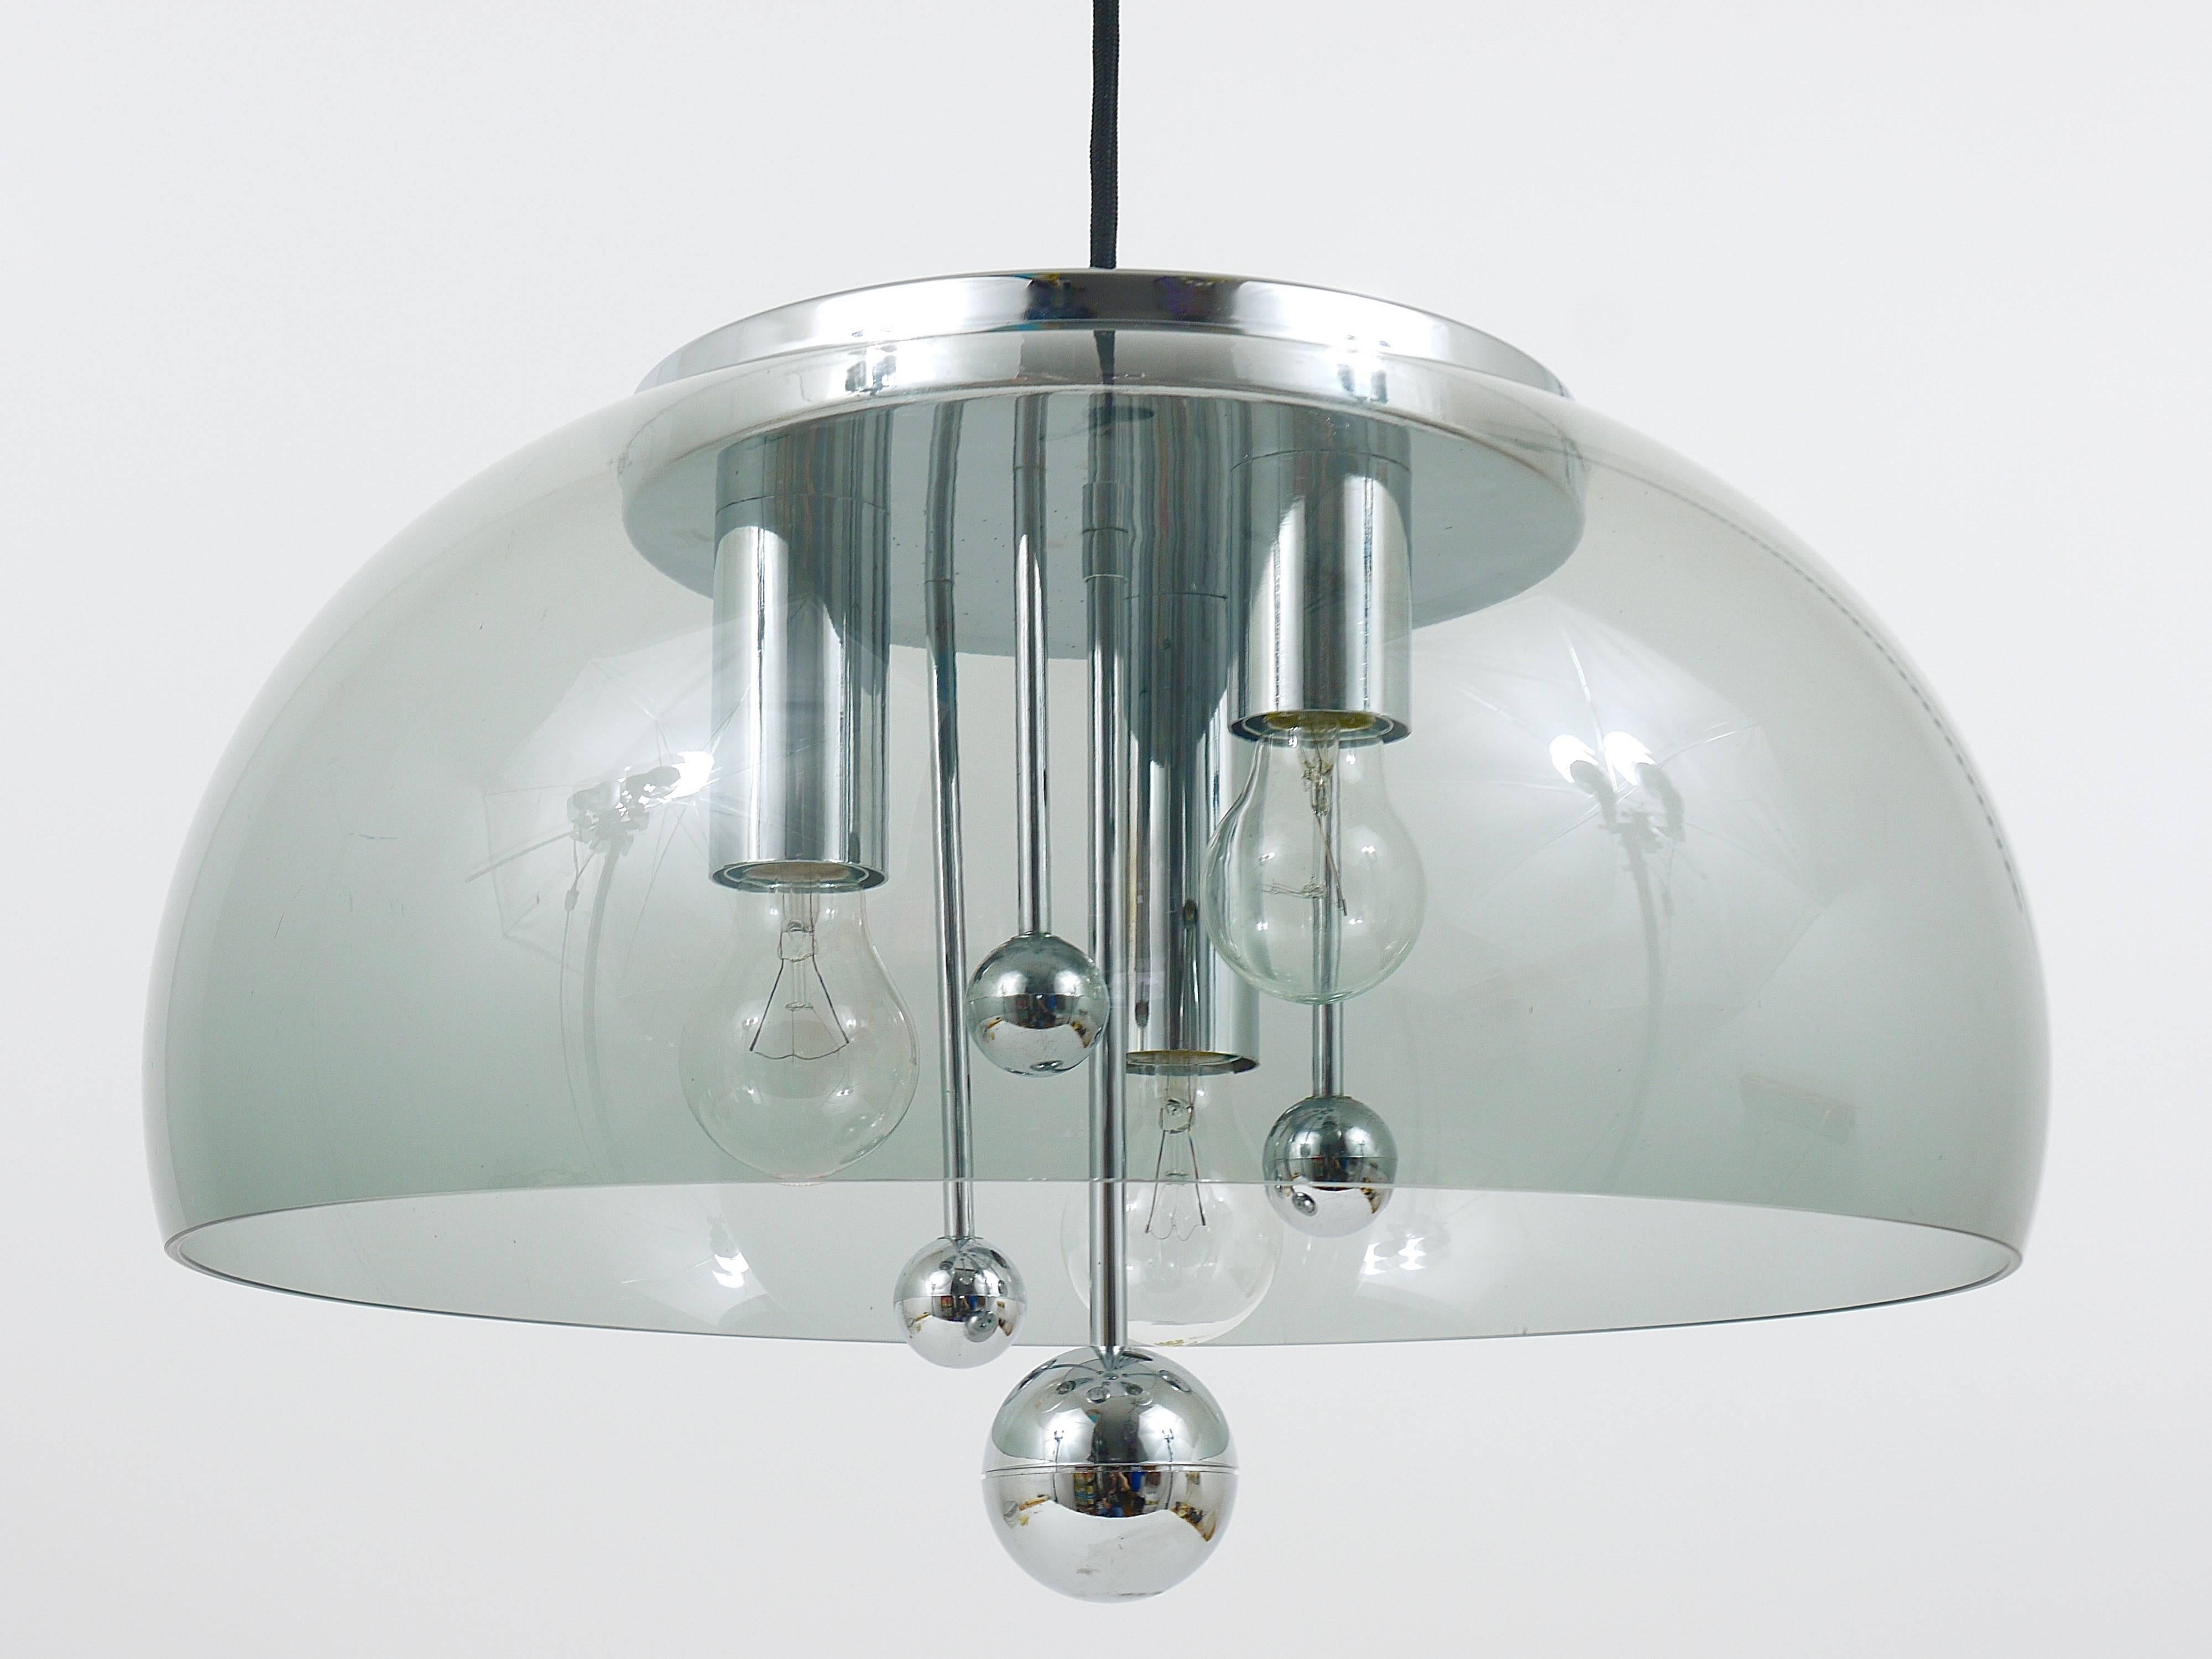 Midcentury Space Age Globe Pendant Lamp with Chromed Spheres, Germany, 1970s For Sale 9